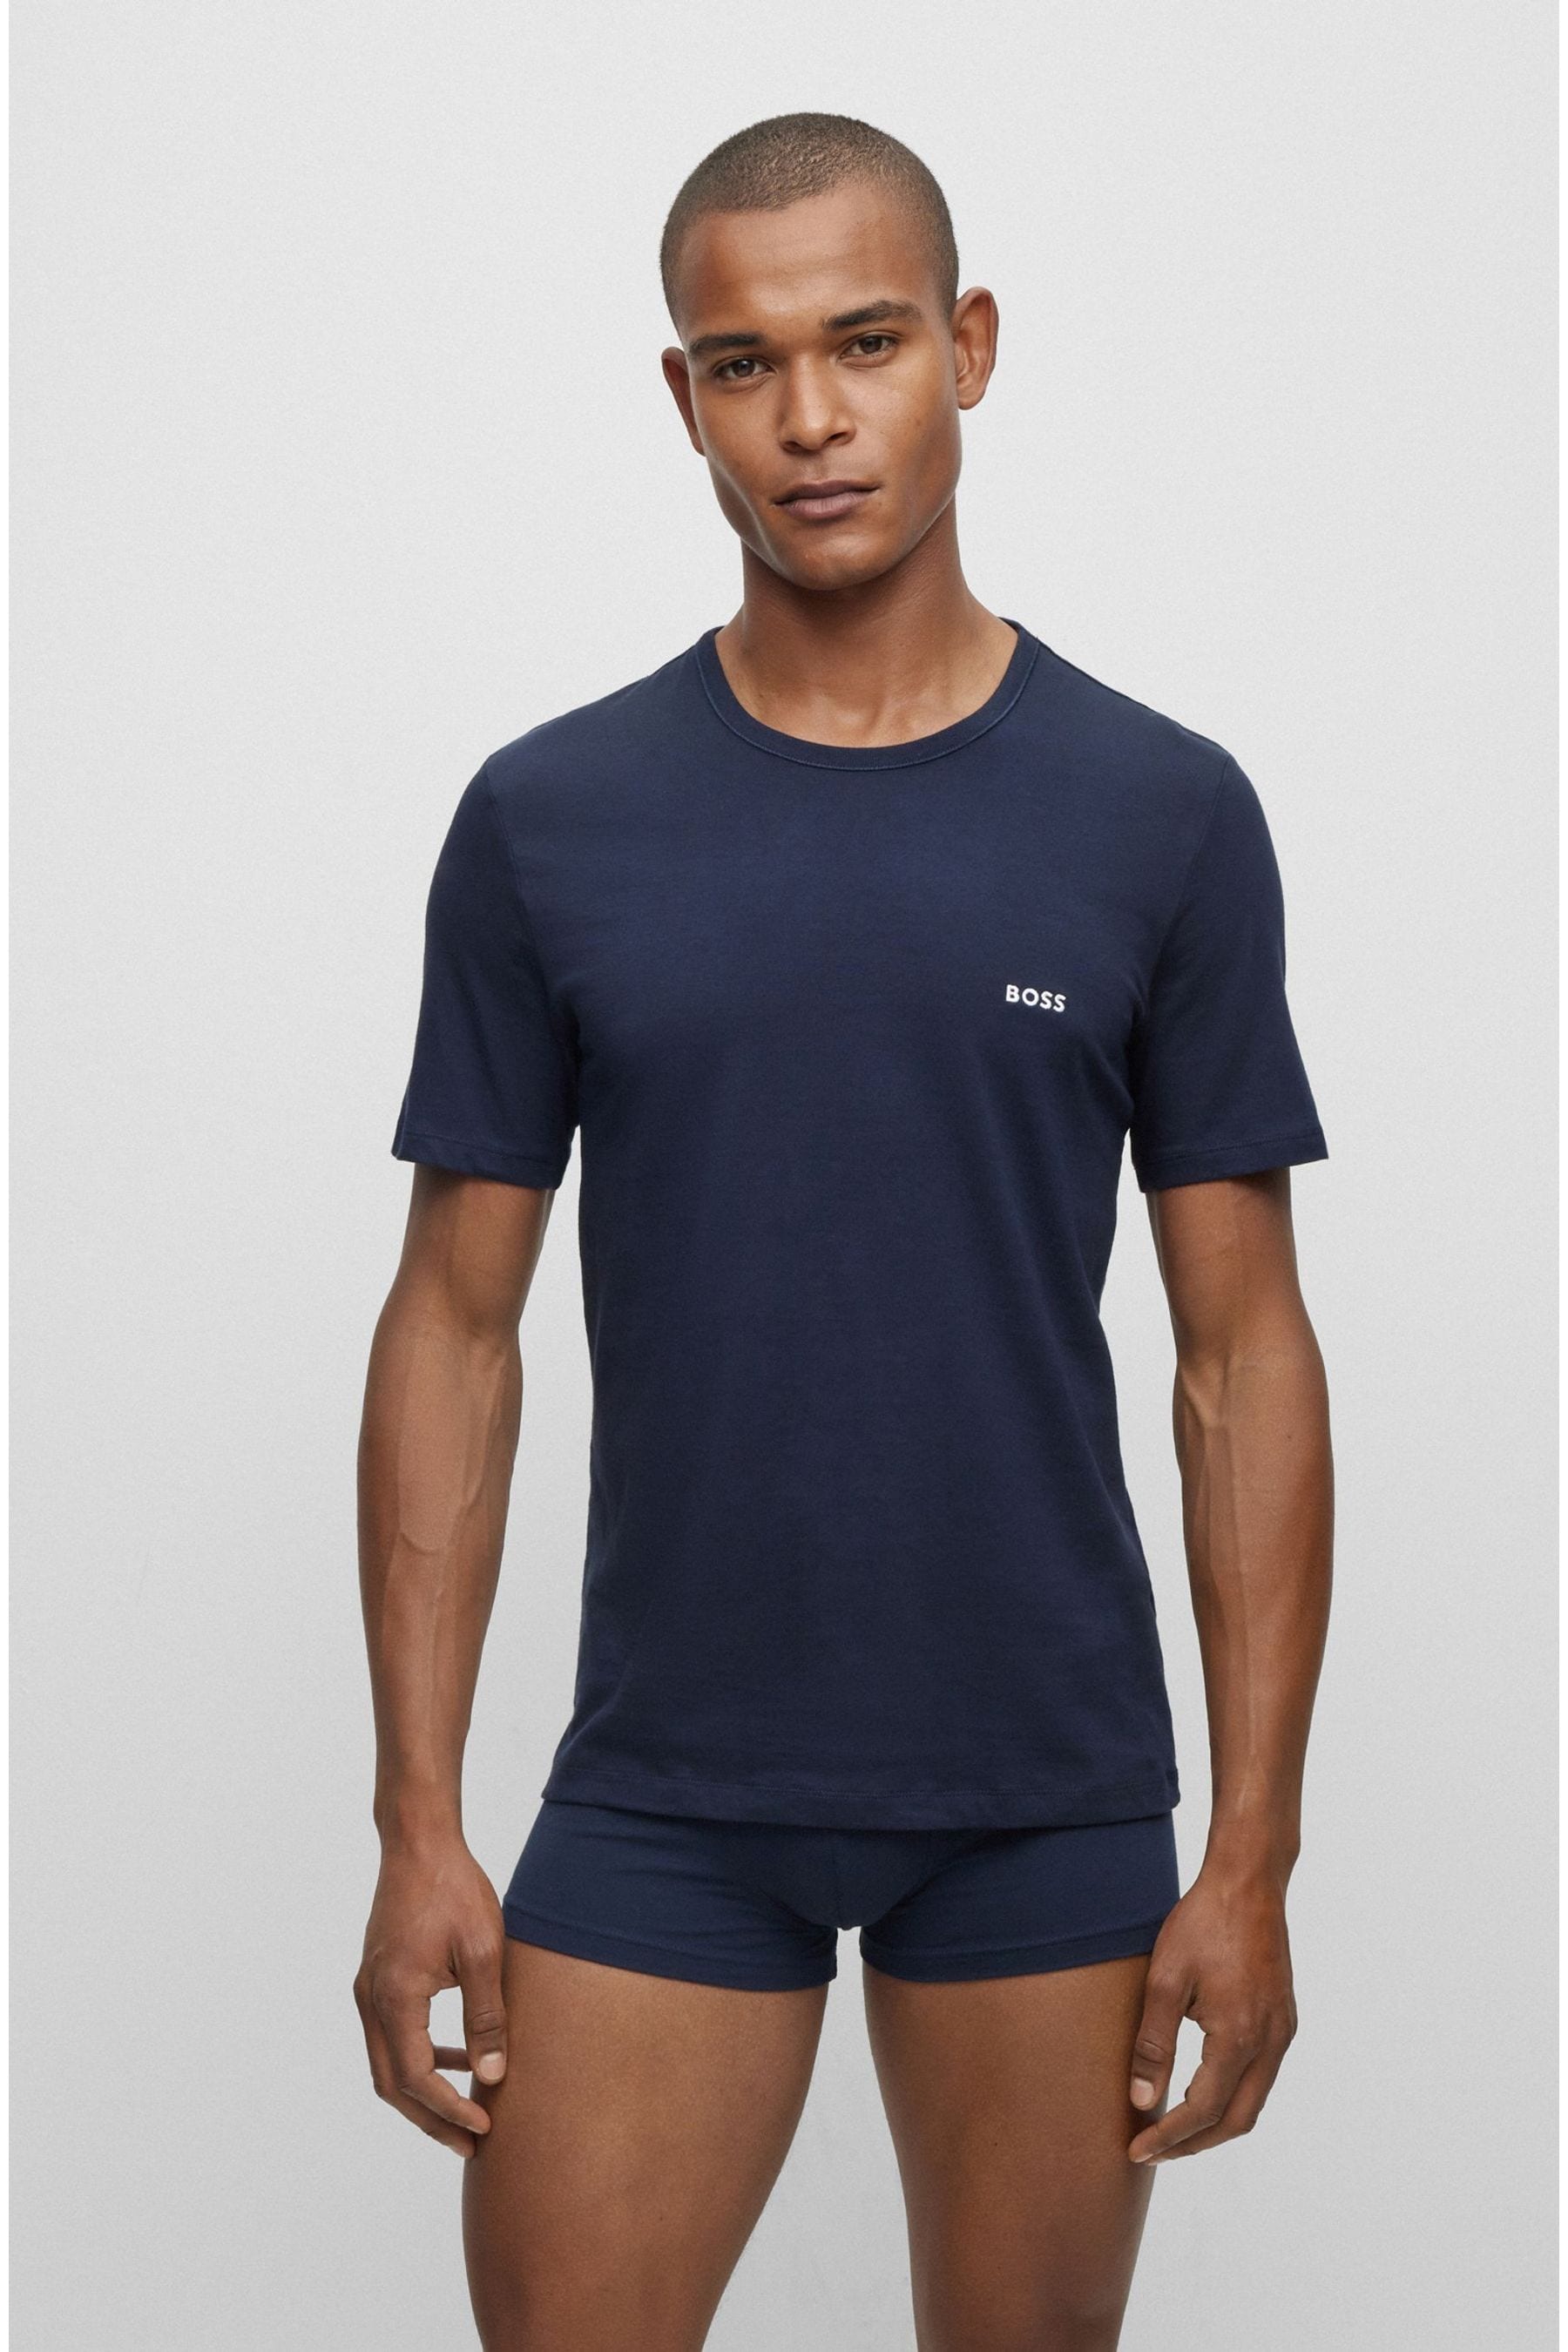 Buy BOSS Black/Beige/Navy T-Shirts 3 Pack from the Next UK online shop